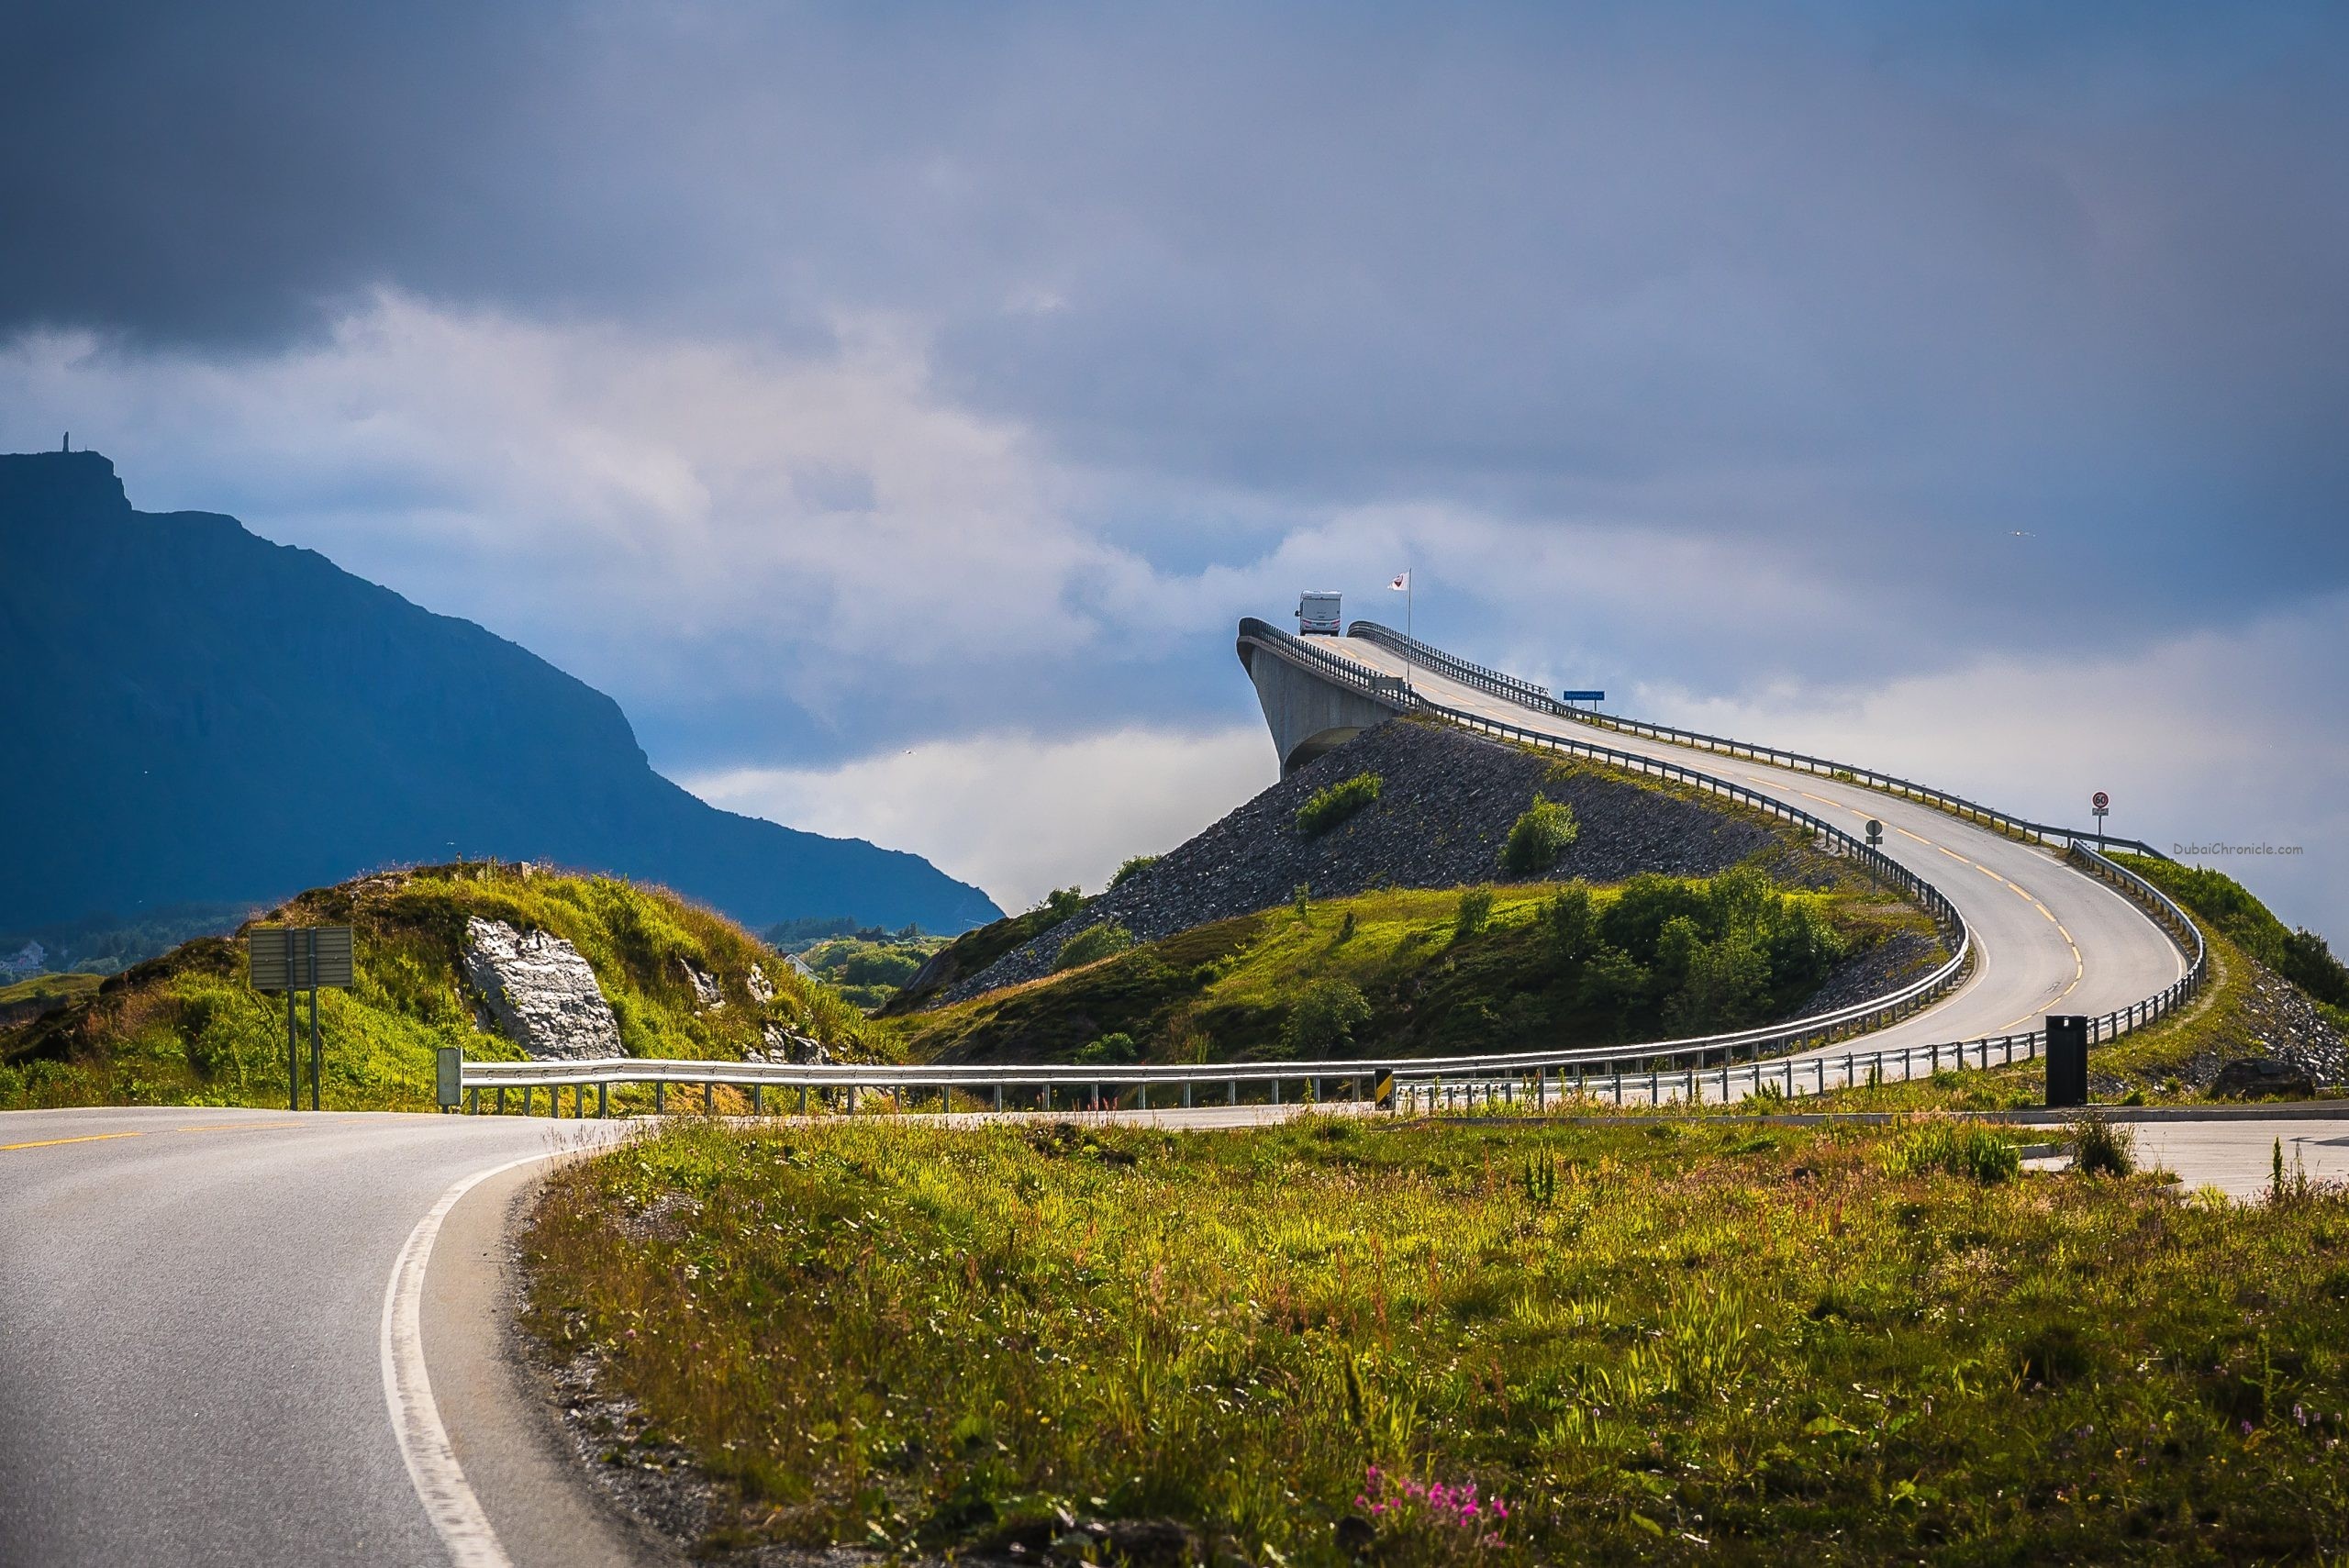 The World's Most Beautiful Road Trip Routes, According To Instagram Data